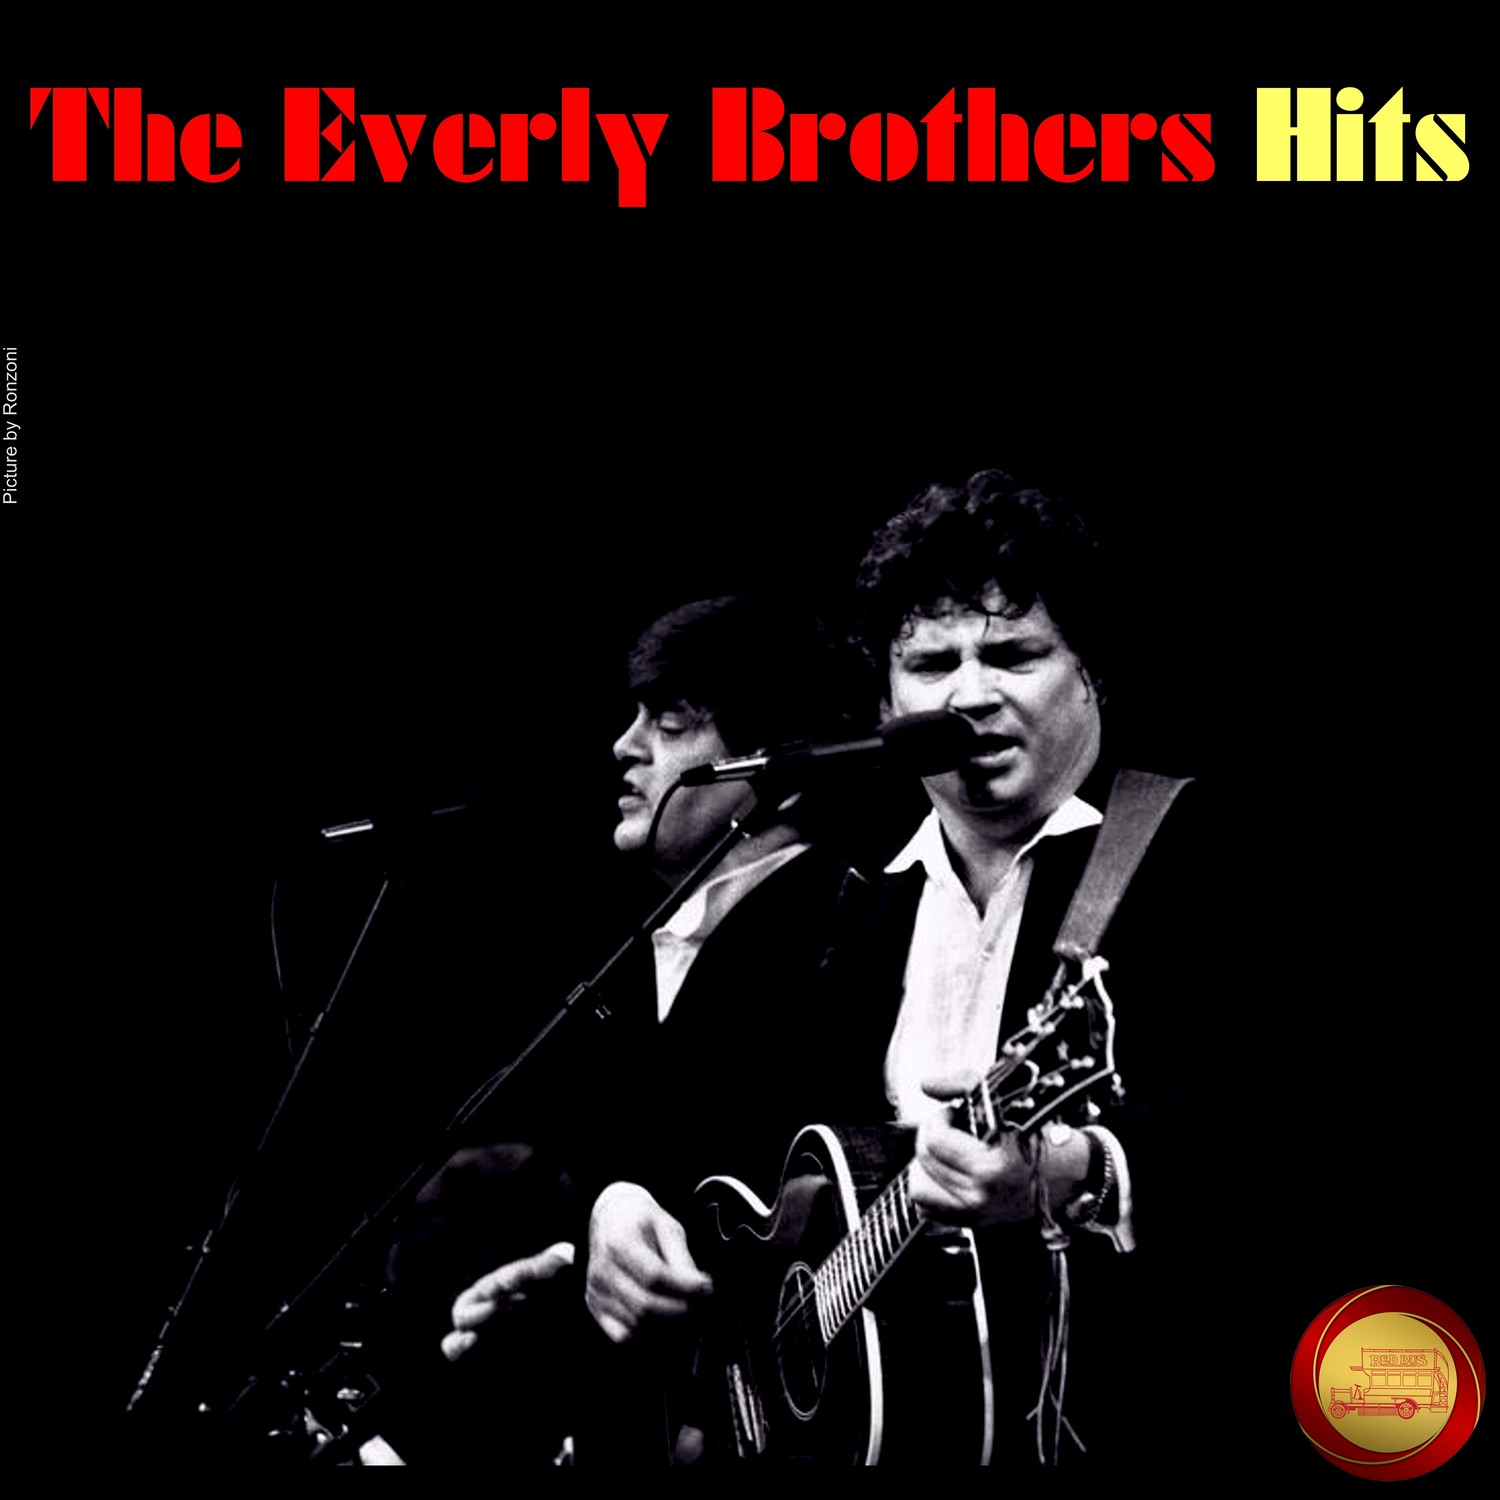 The Everly Brothers Hits